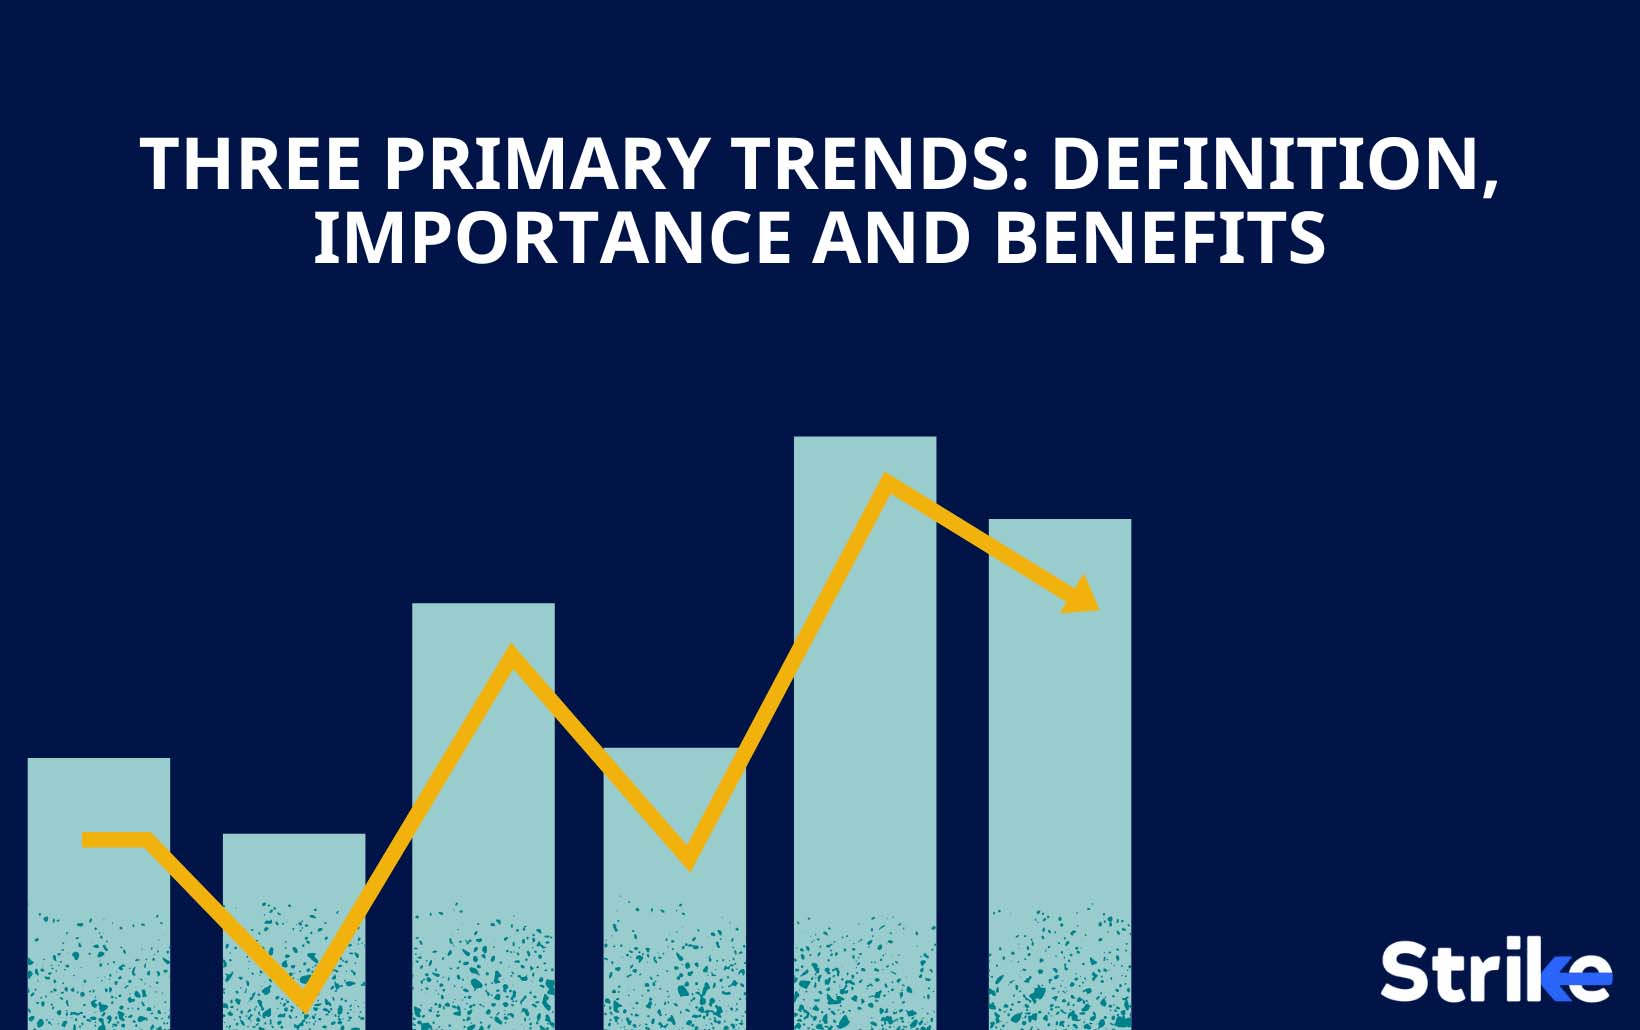 Three Primary Trends: Definition, Importance and Benefits